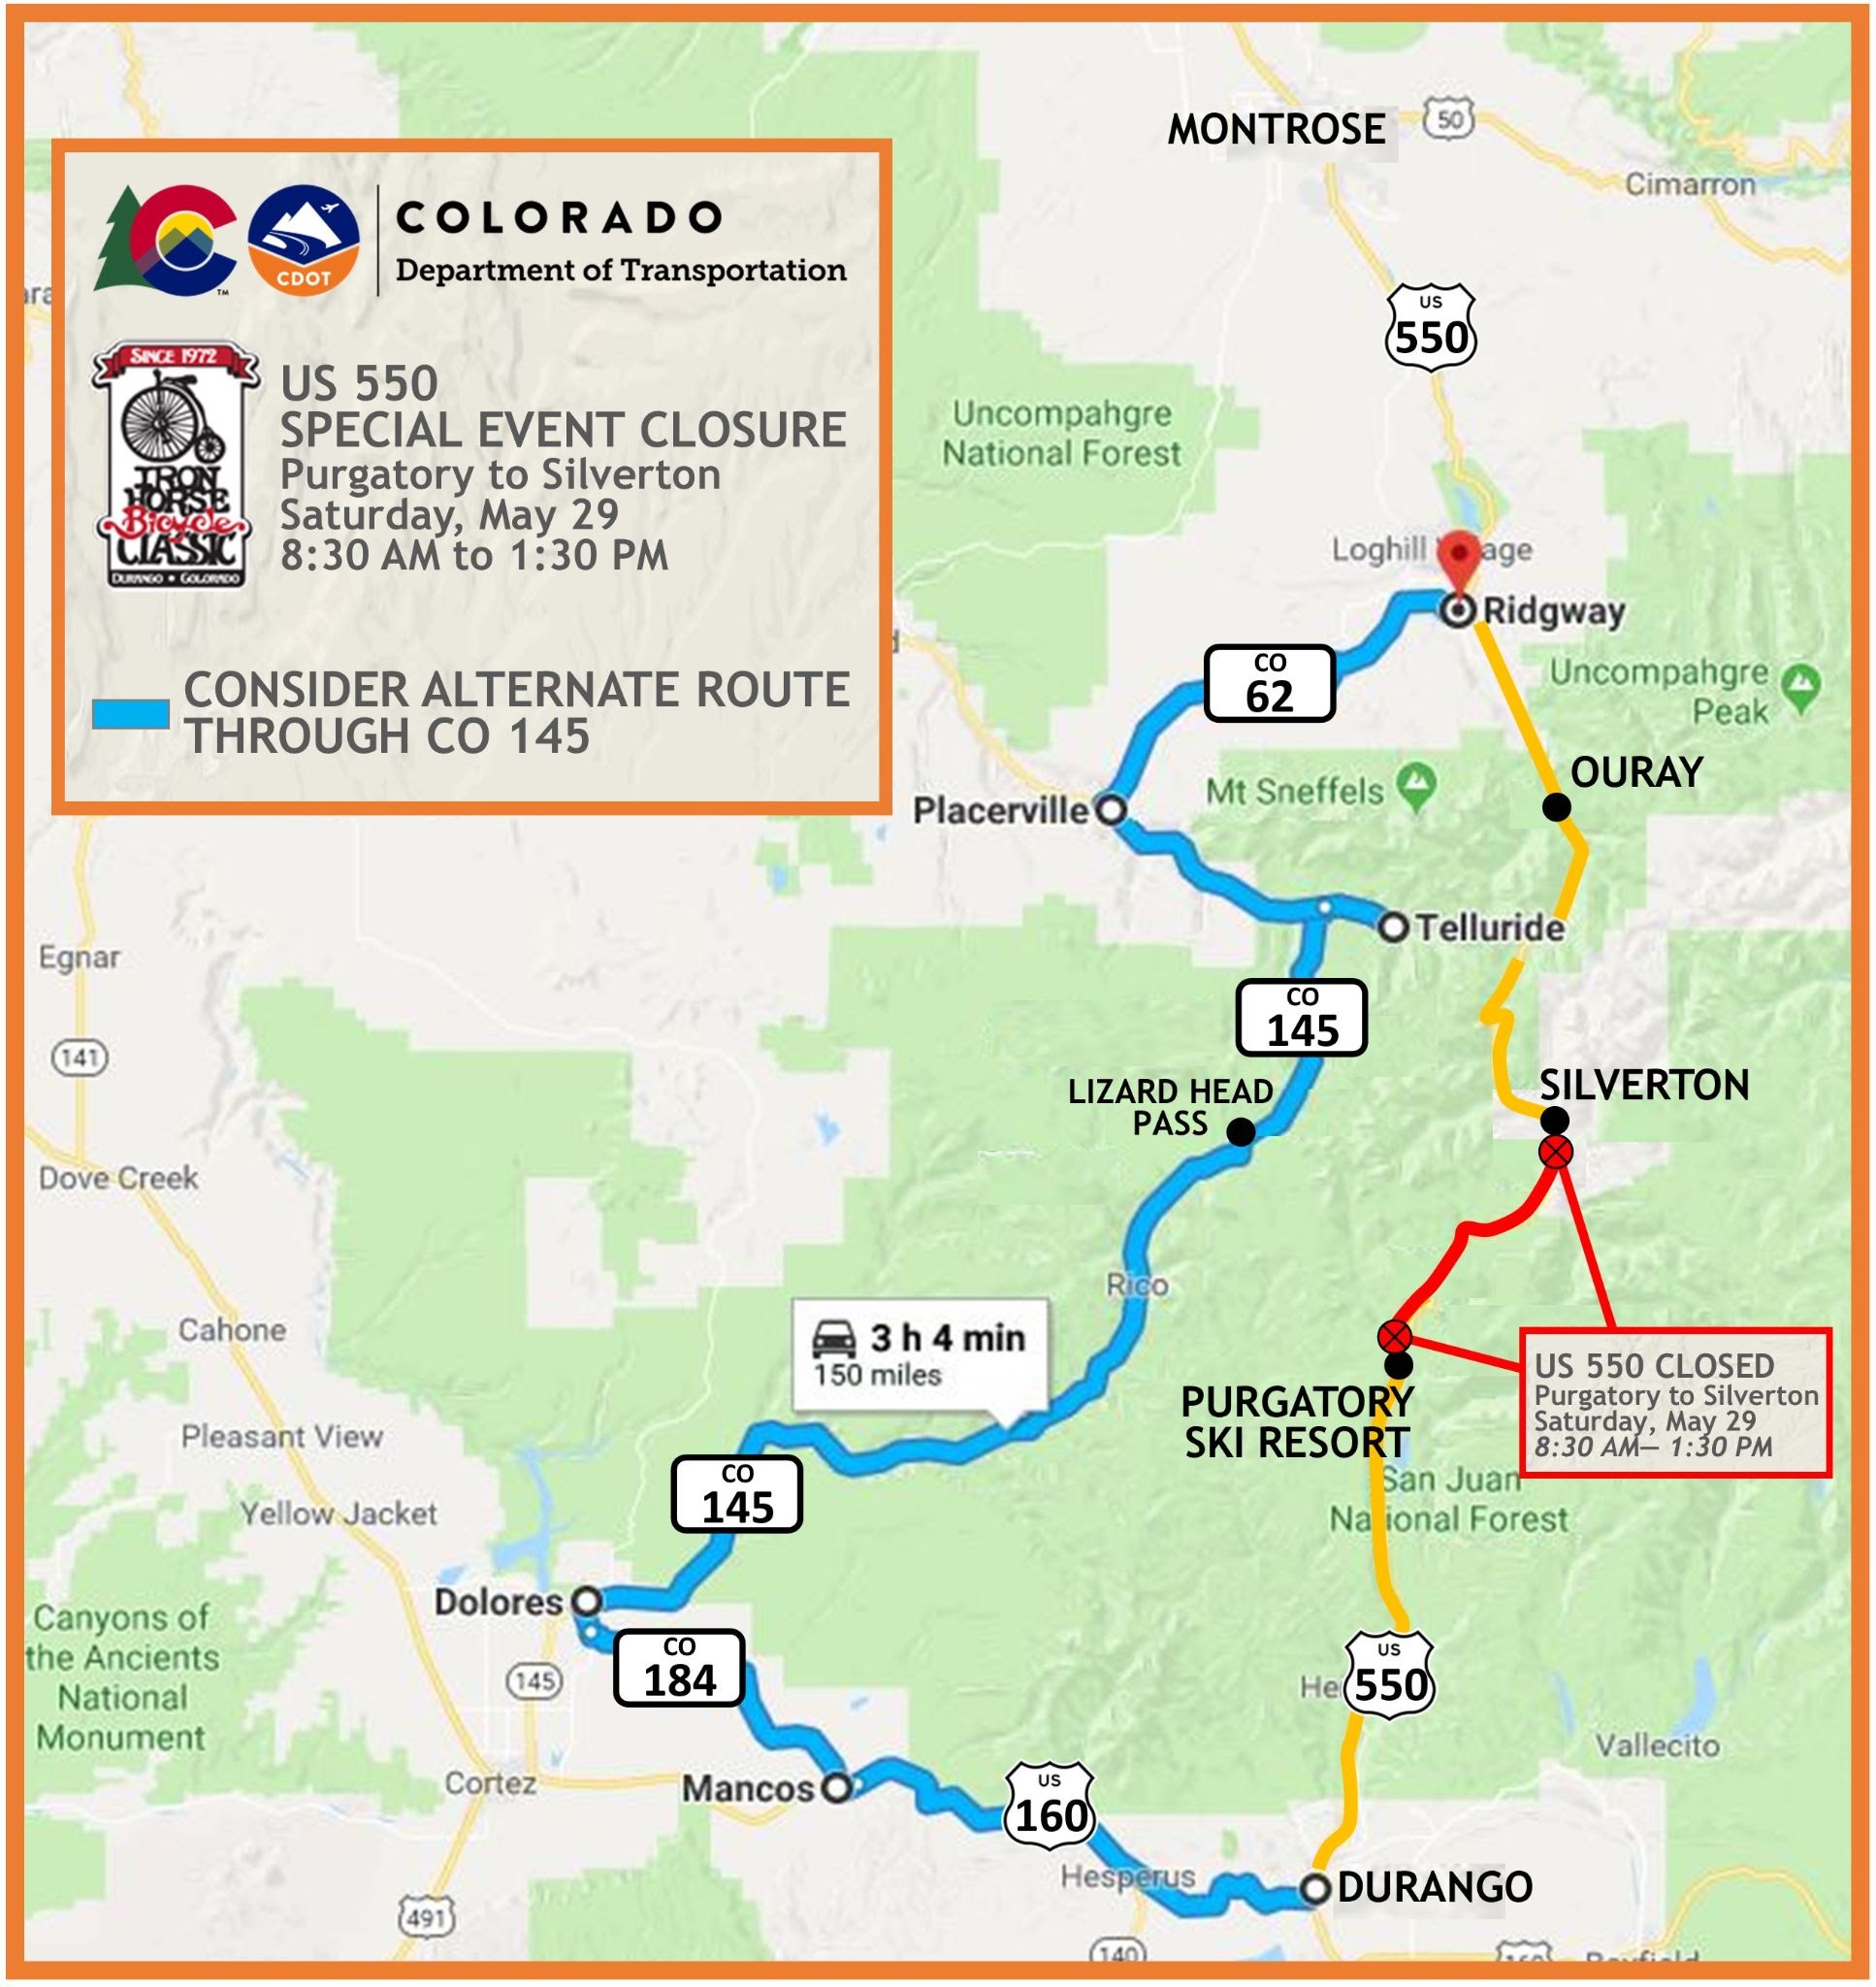 CO 145 Alternate Route on US 550 Iron Horse event on  May 2021.jpg detail image